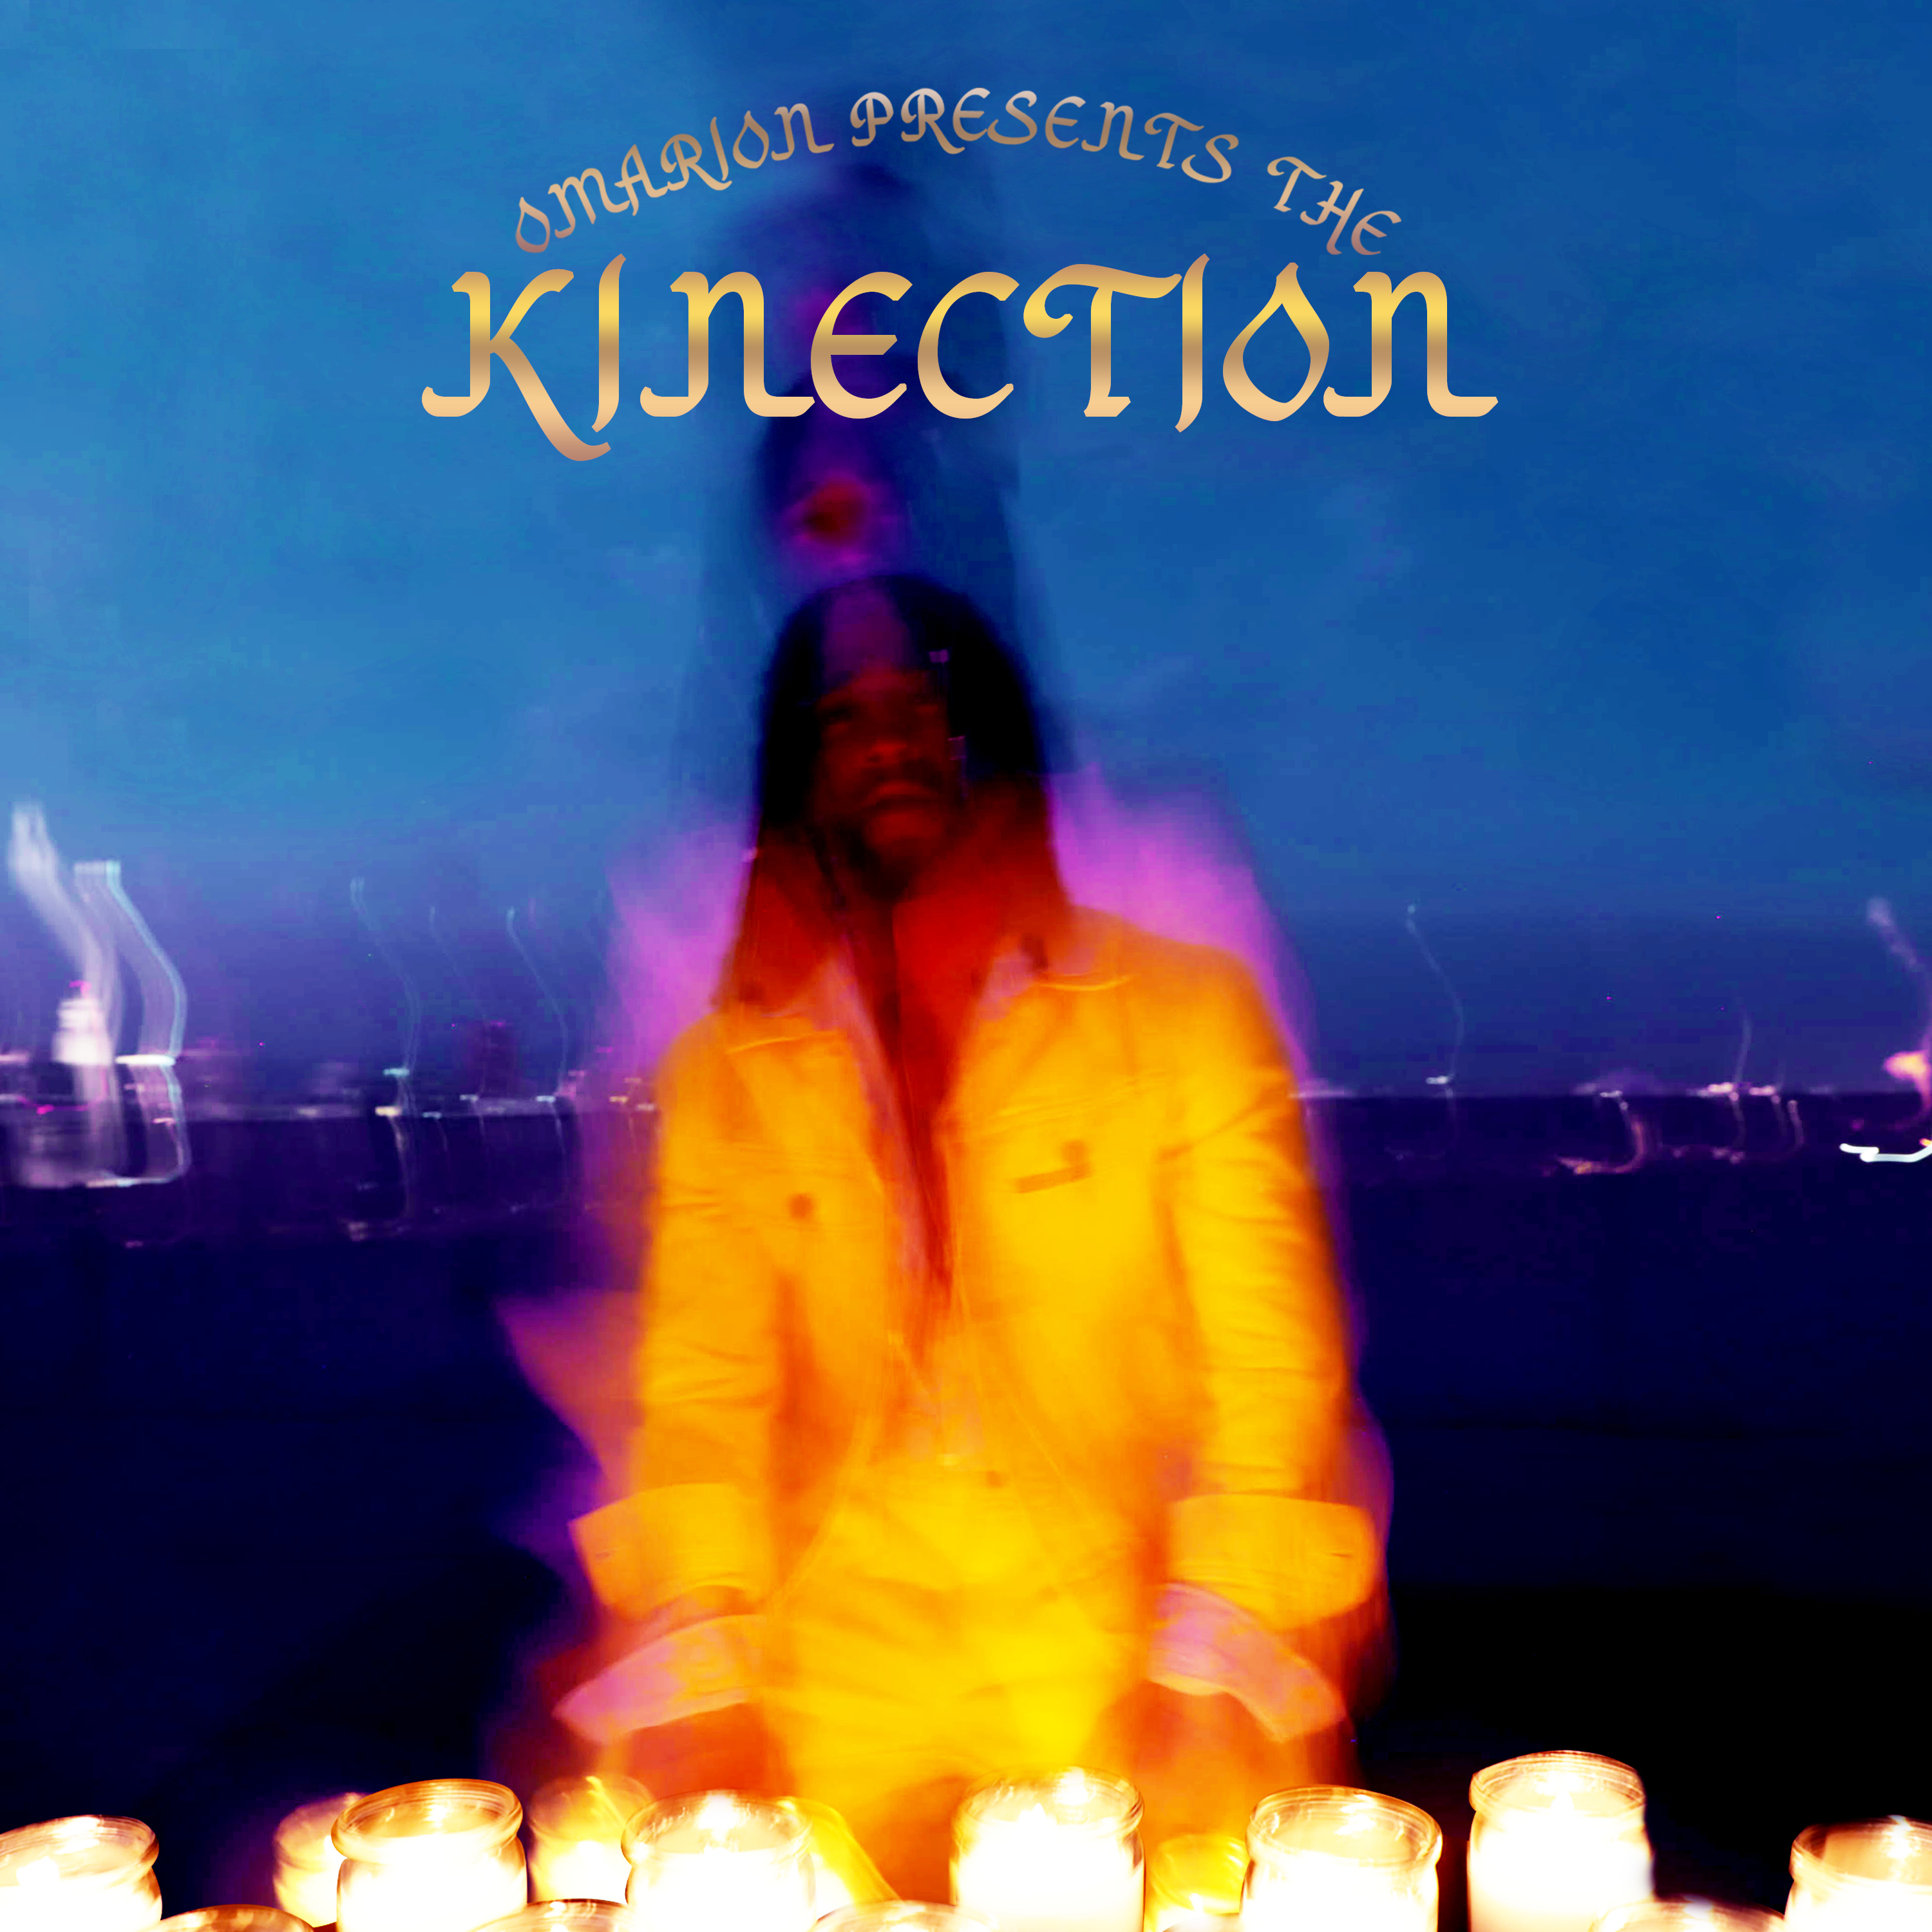 Omarion Returns With New Album “The Kinection” Featuring Ghostface Killah, T-Pain, Wale, & More